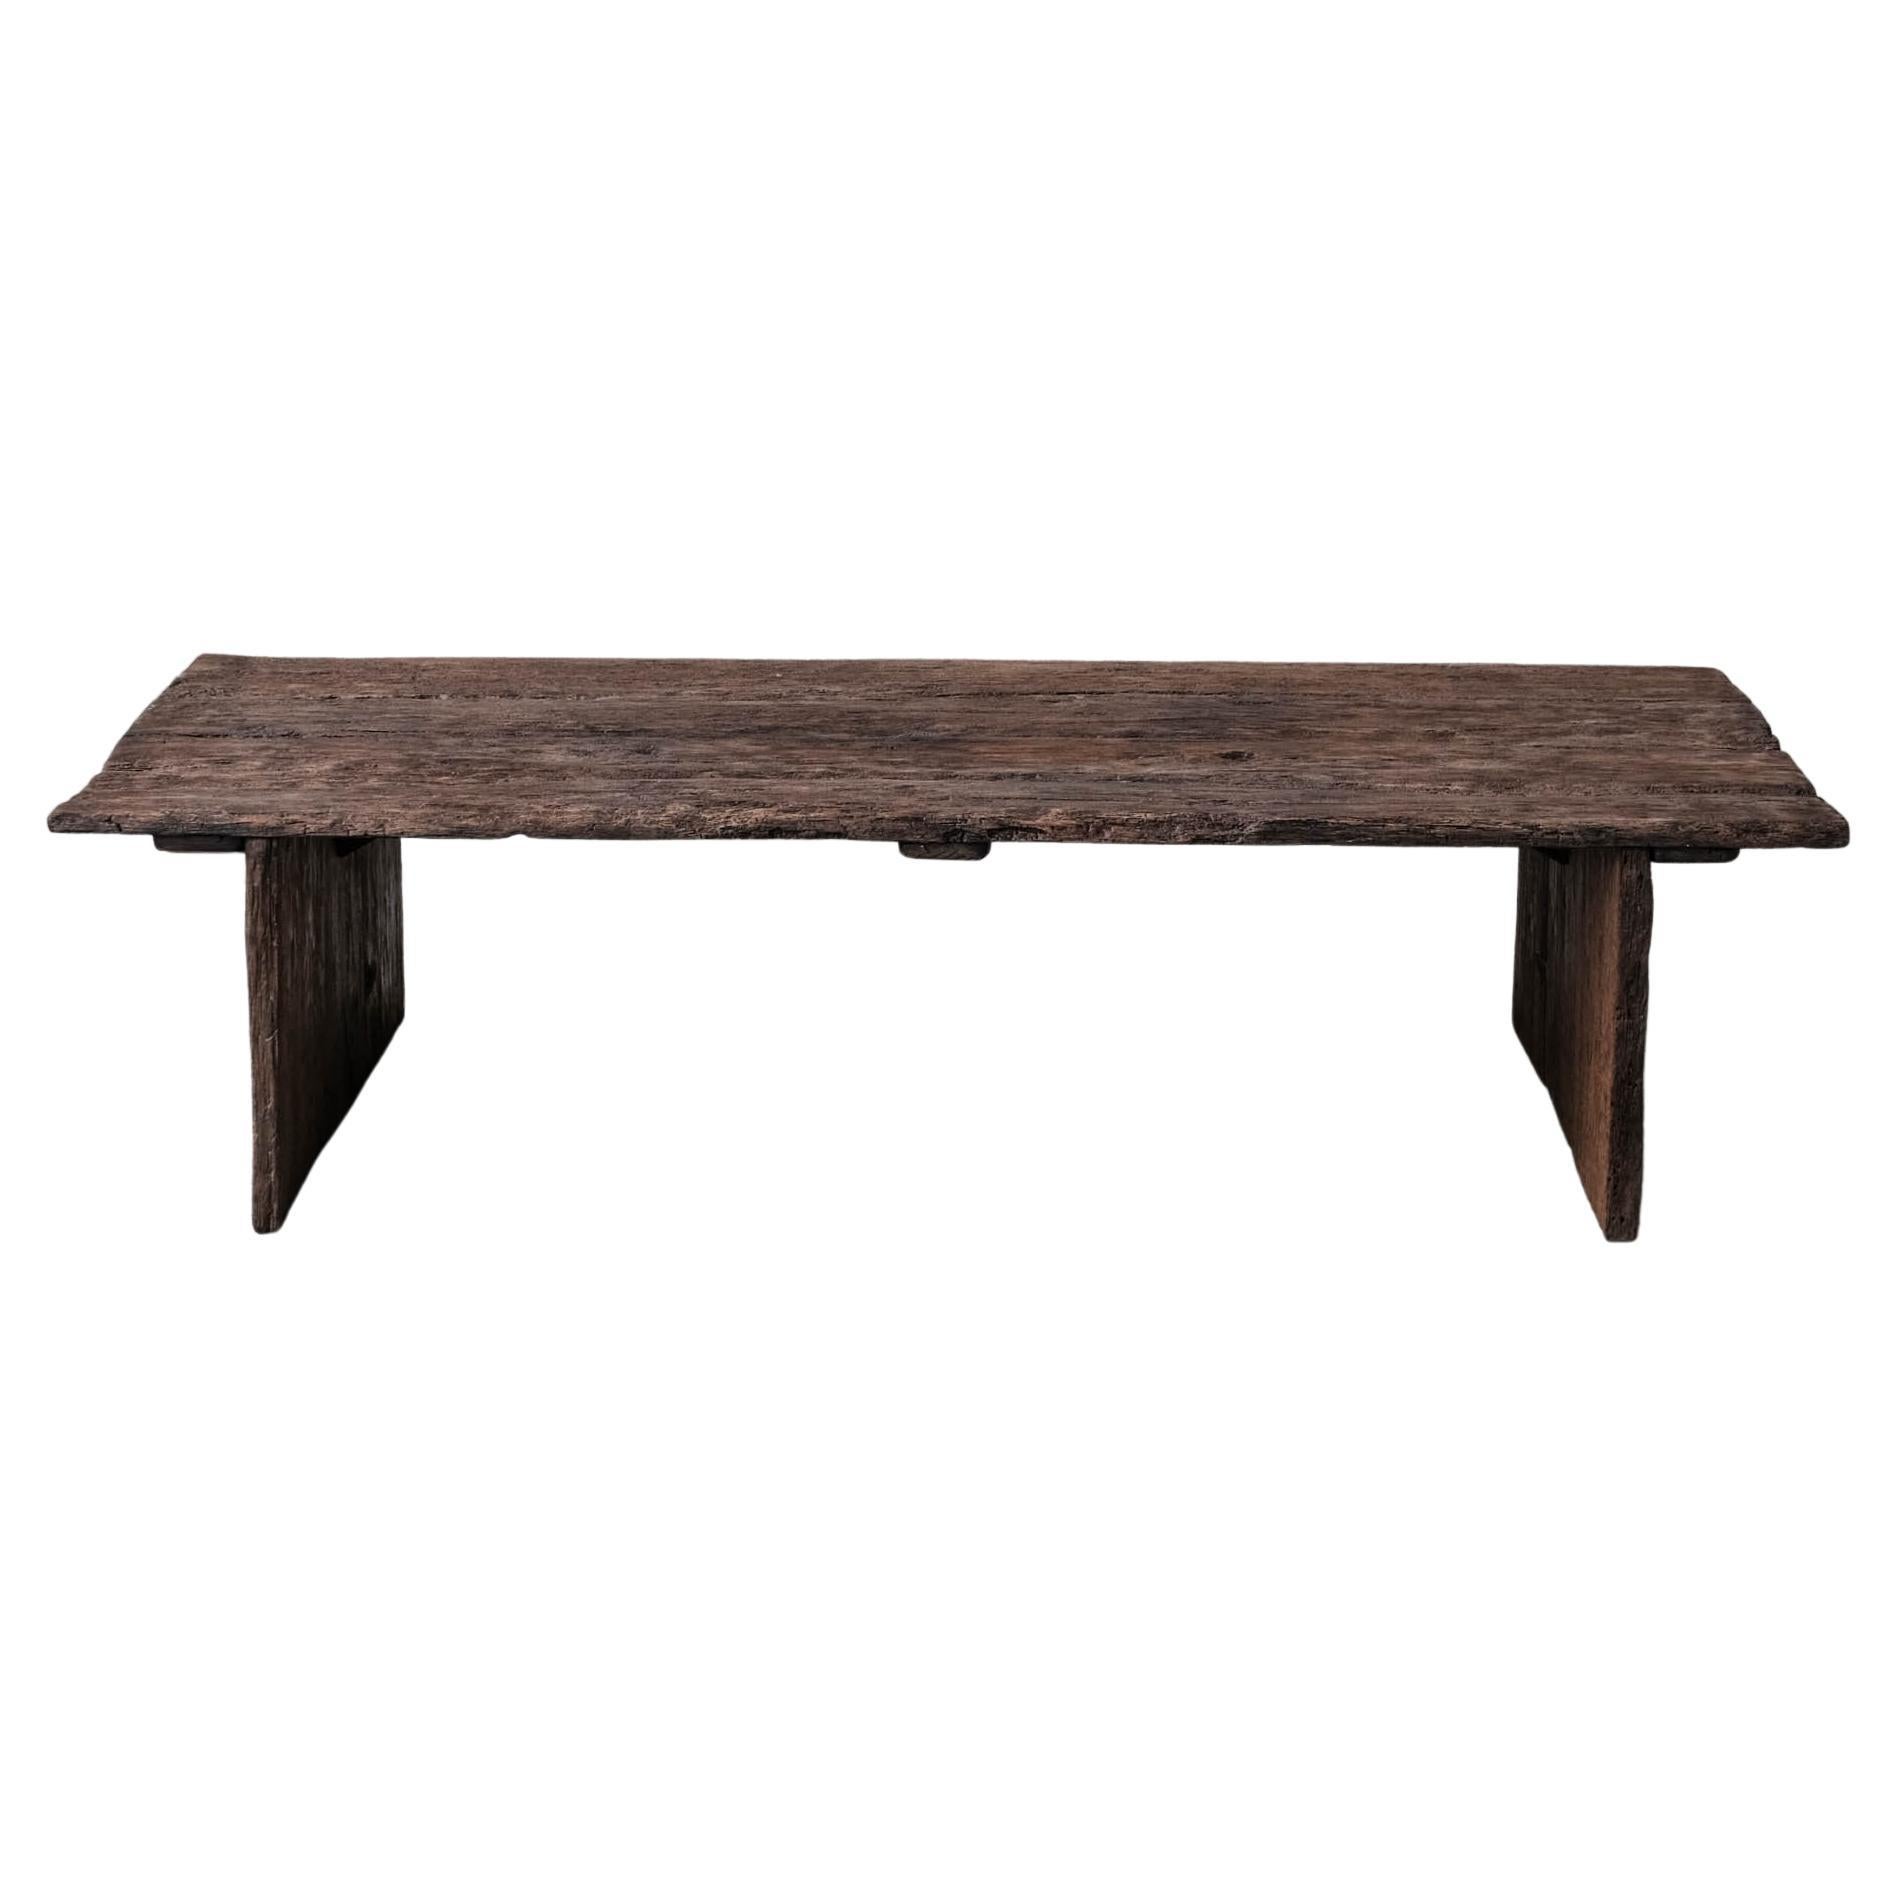 Antique Wabi-Sabi Style French Wooden Coffee Table